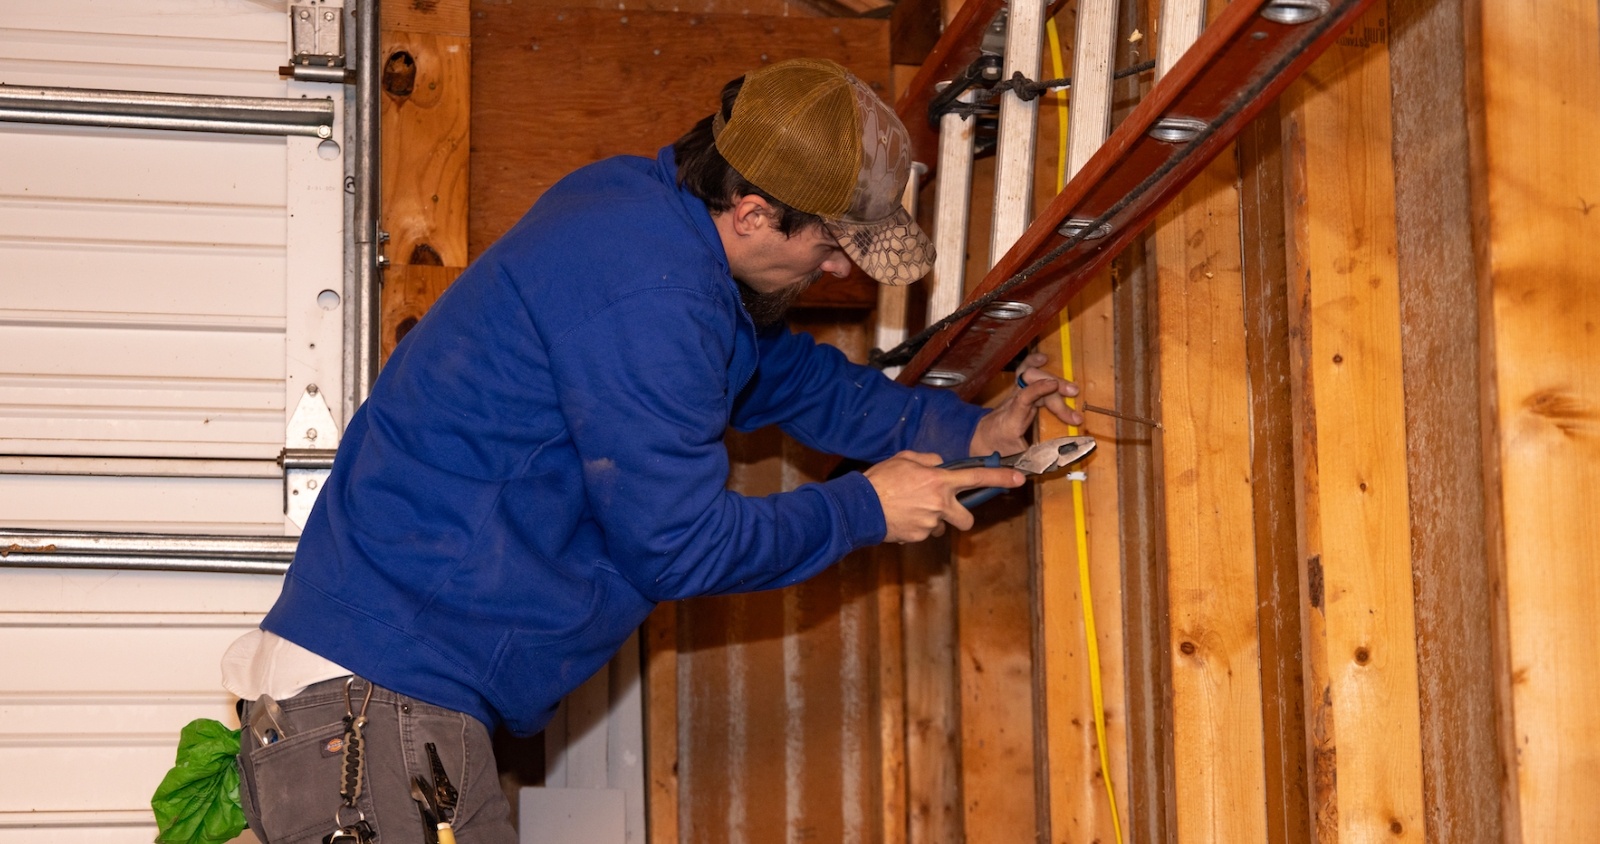 Electrician holding pliers installing wiring in garage